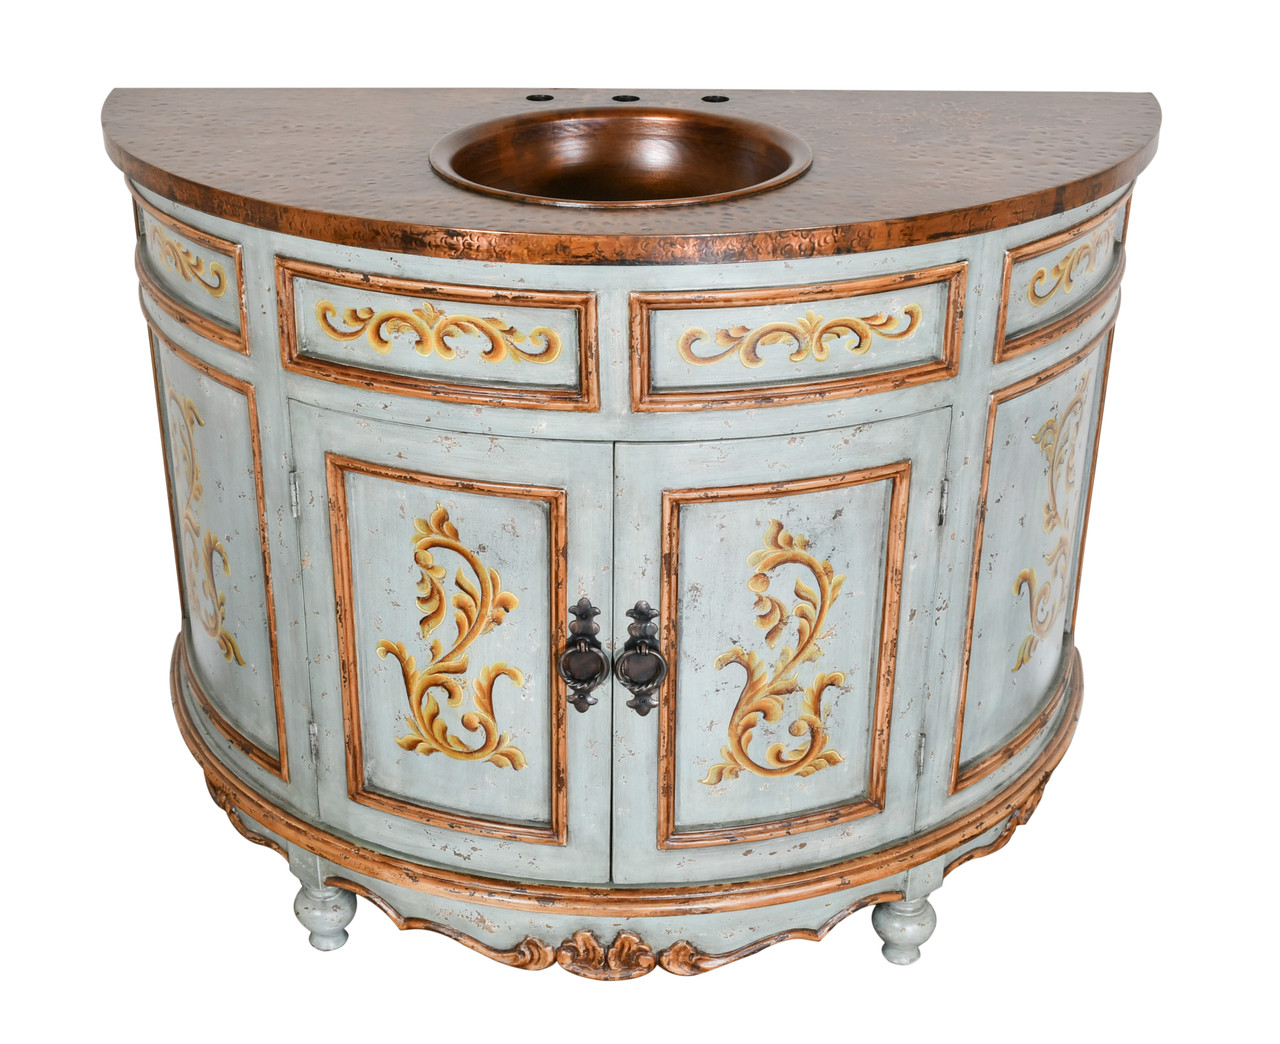 48 Handcrafted and Hand Painted, Sky blue Copper Top Peruvian Bath Vanity